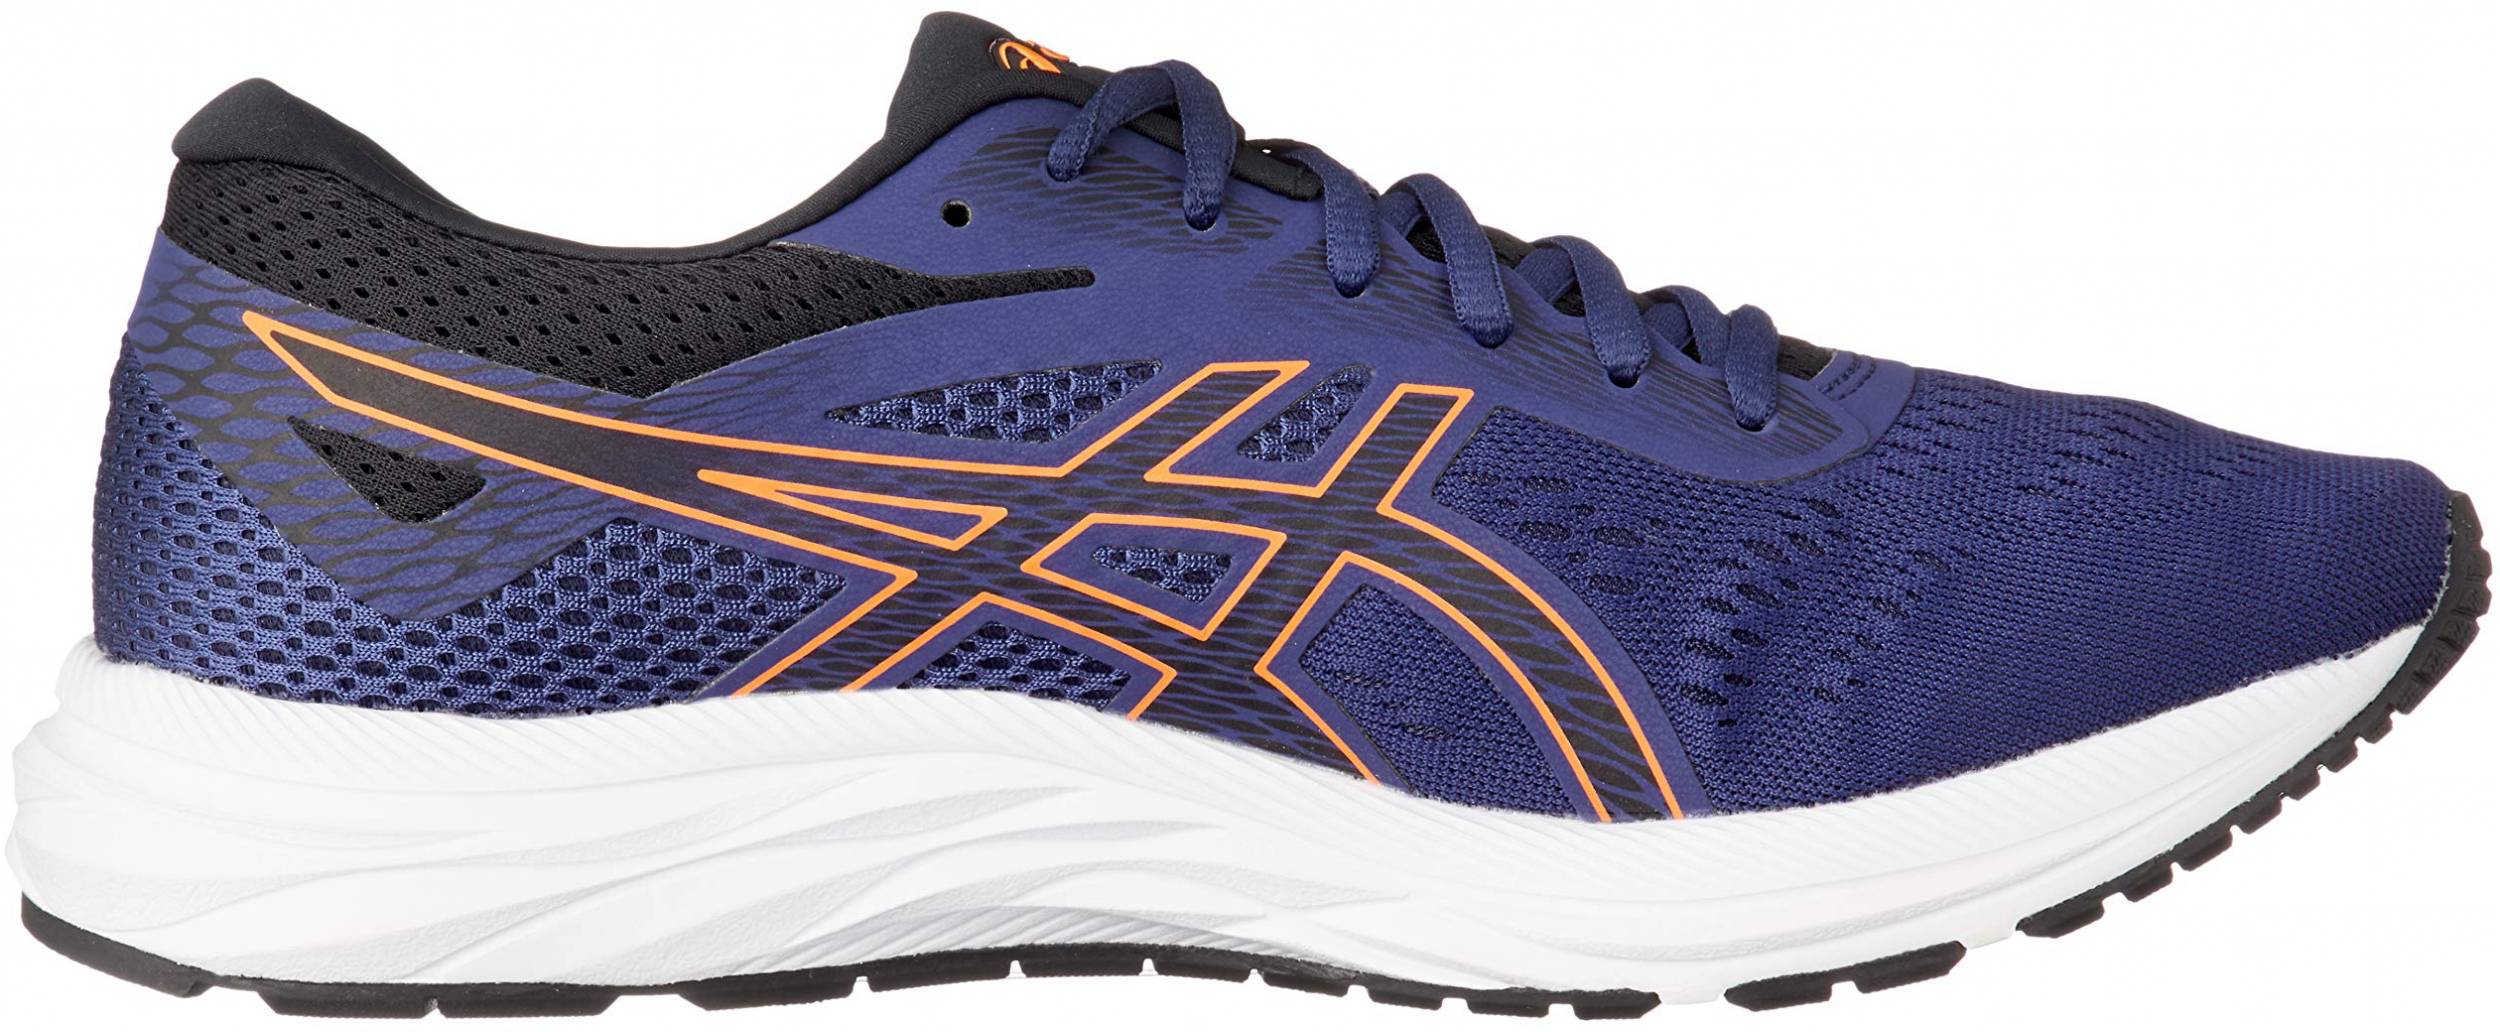 ASICS Gel Excite 6 Review 2023, Facts, Deals ($60) RunRepeat